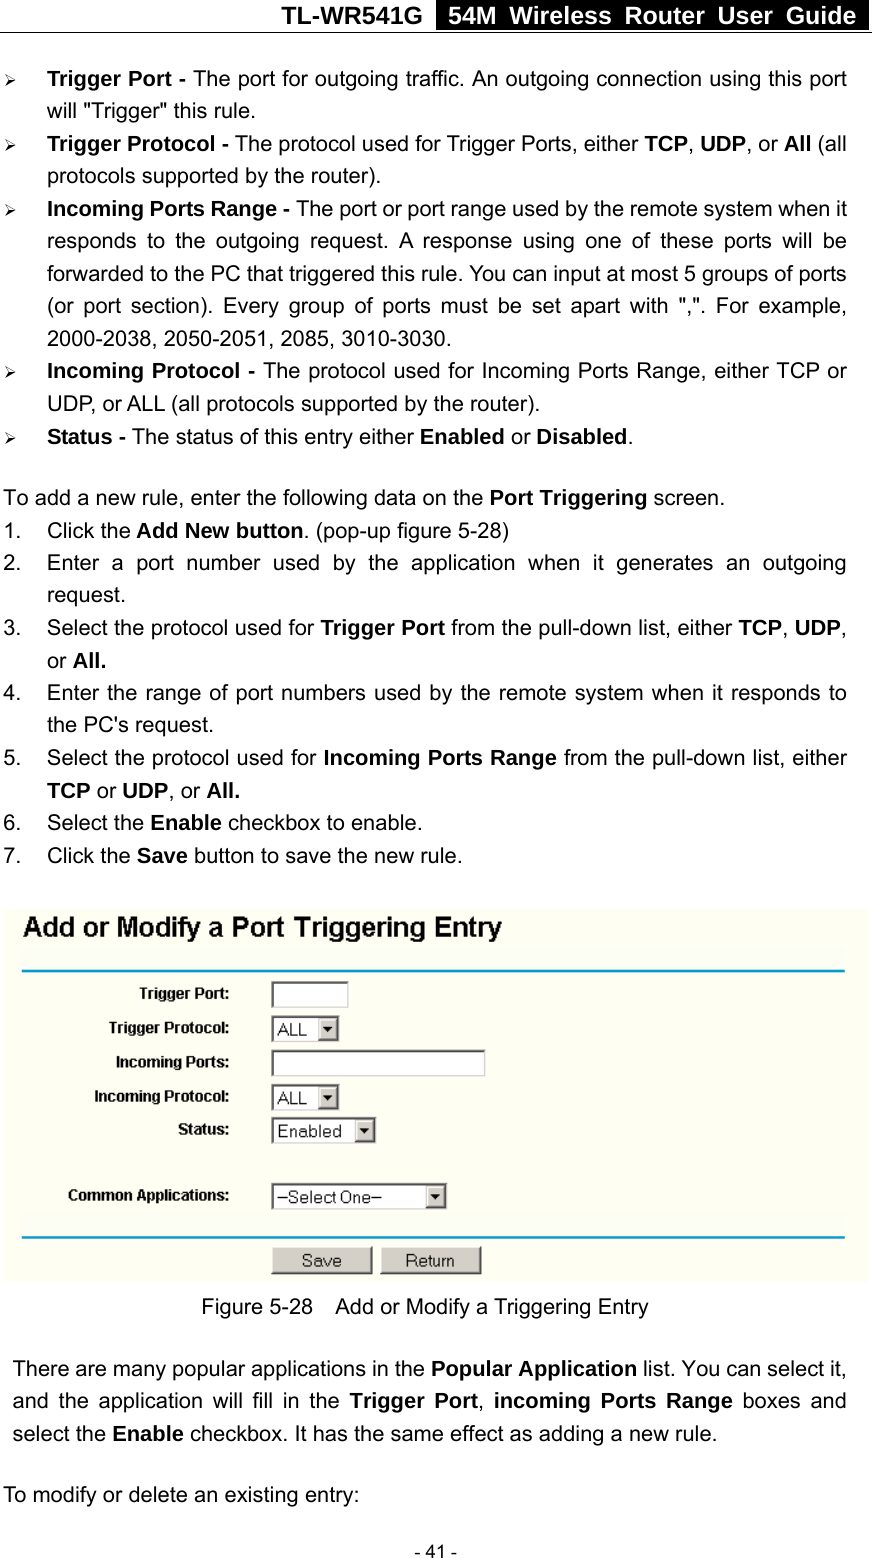 TL-WR541G   54M Wireless Router User Guide  ¾ Trigger Port - The port for outgoing traffic. An outgoing connection using this port will &quot;Trigger&quot; this rule. ¾ Trigger Protocol - The protocol used for Trigger Ports, either TCP, UDP, or All (all protocols supported by the router). ¾ Incoming Ports Range - The port or port range used by the remote system when it responds to the outgoing request. A response using one of these ports will be forwarded to the PC that triggered this rule. You can input at most 5 groups of ports (or port section). Every group of ports must be set apart with &quot;,&quot;. For example, 2000-2038, 2050-2051, 2085, 3010-3030. ¾ Incoming Protocol - The protocol used for Incoming Ports Range, either TCP or UDP, or ALL (all protocols supported by the router). ¾ Status - The status of this entry either Enabled or Disabled. To add a new rule, enter the following data on the Port Triggering screen.   1. Click the Add New button. (pop-up figure 5-28) 2.  Enter a port number used by the application when it generates an outgoing request.   3.  Select the protocol used for Trigger Port from the pull-down list, either TCP, UDP, or All. 4.  Enter the range of port numbers used by the remote system when it responds to the PC&apos;s request. 5.  Select the protocol used for Incoming Ports Range from the pull-down list, either TCP or UDP, or All. 6. Select the Enable checkbox to enable.   7. Click the Save button to save the new rule.  Figure 5-28    Add or Modify a Triggering Entry There are many popular applications in the Popular Application list. You can select it, and the application will fill in the Trigger Port,  incoming Ports Range boxes and select the Enable checkbox. It has the same effect as adding a new rule. To modify or delete an existing entry:  - 41 - 